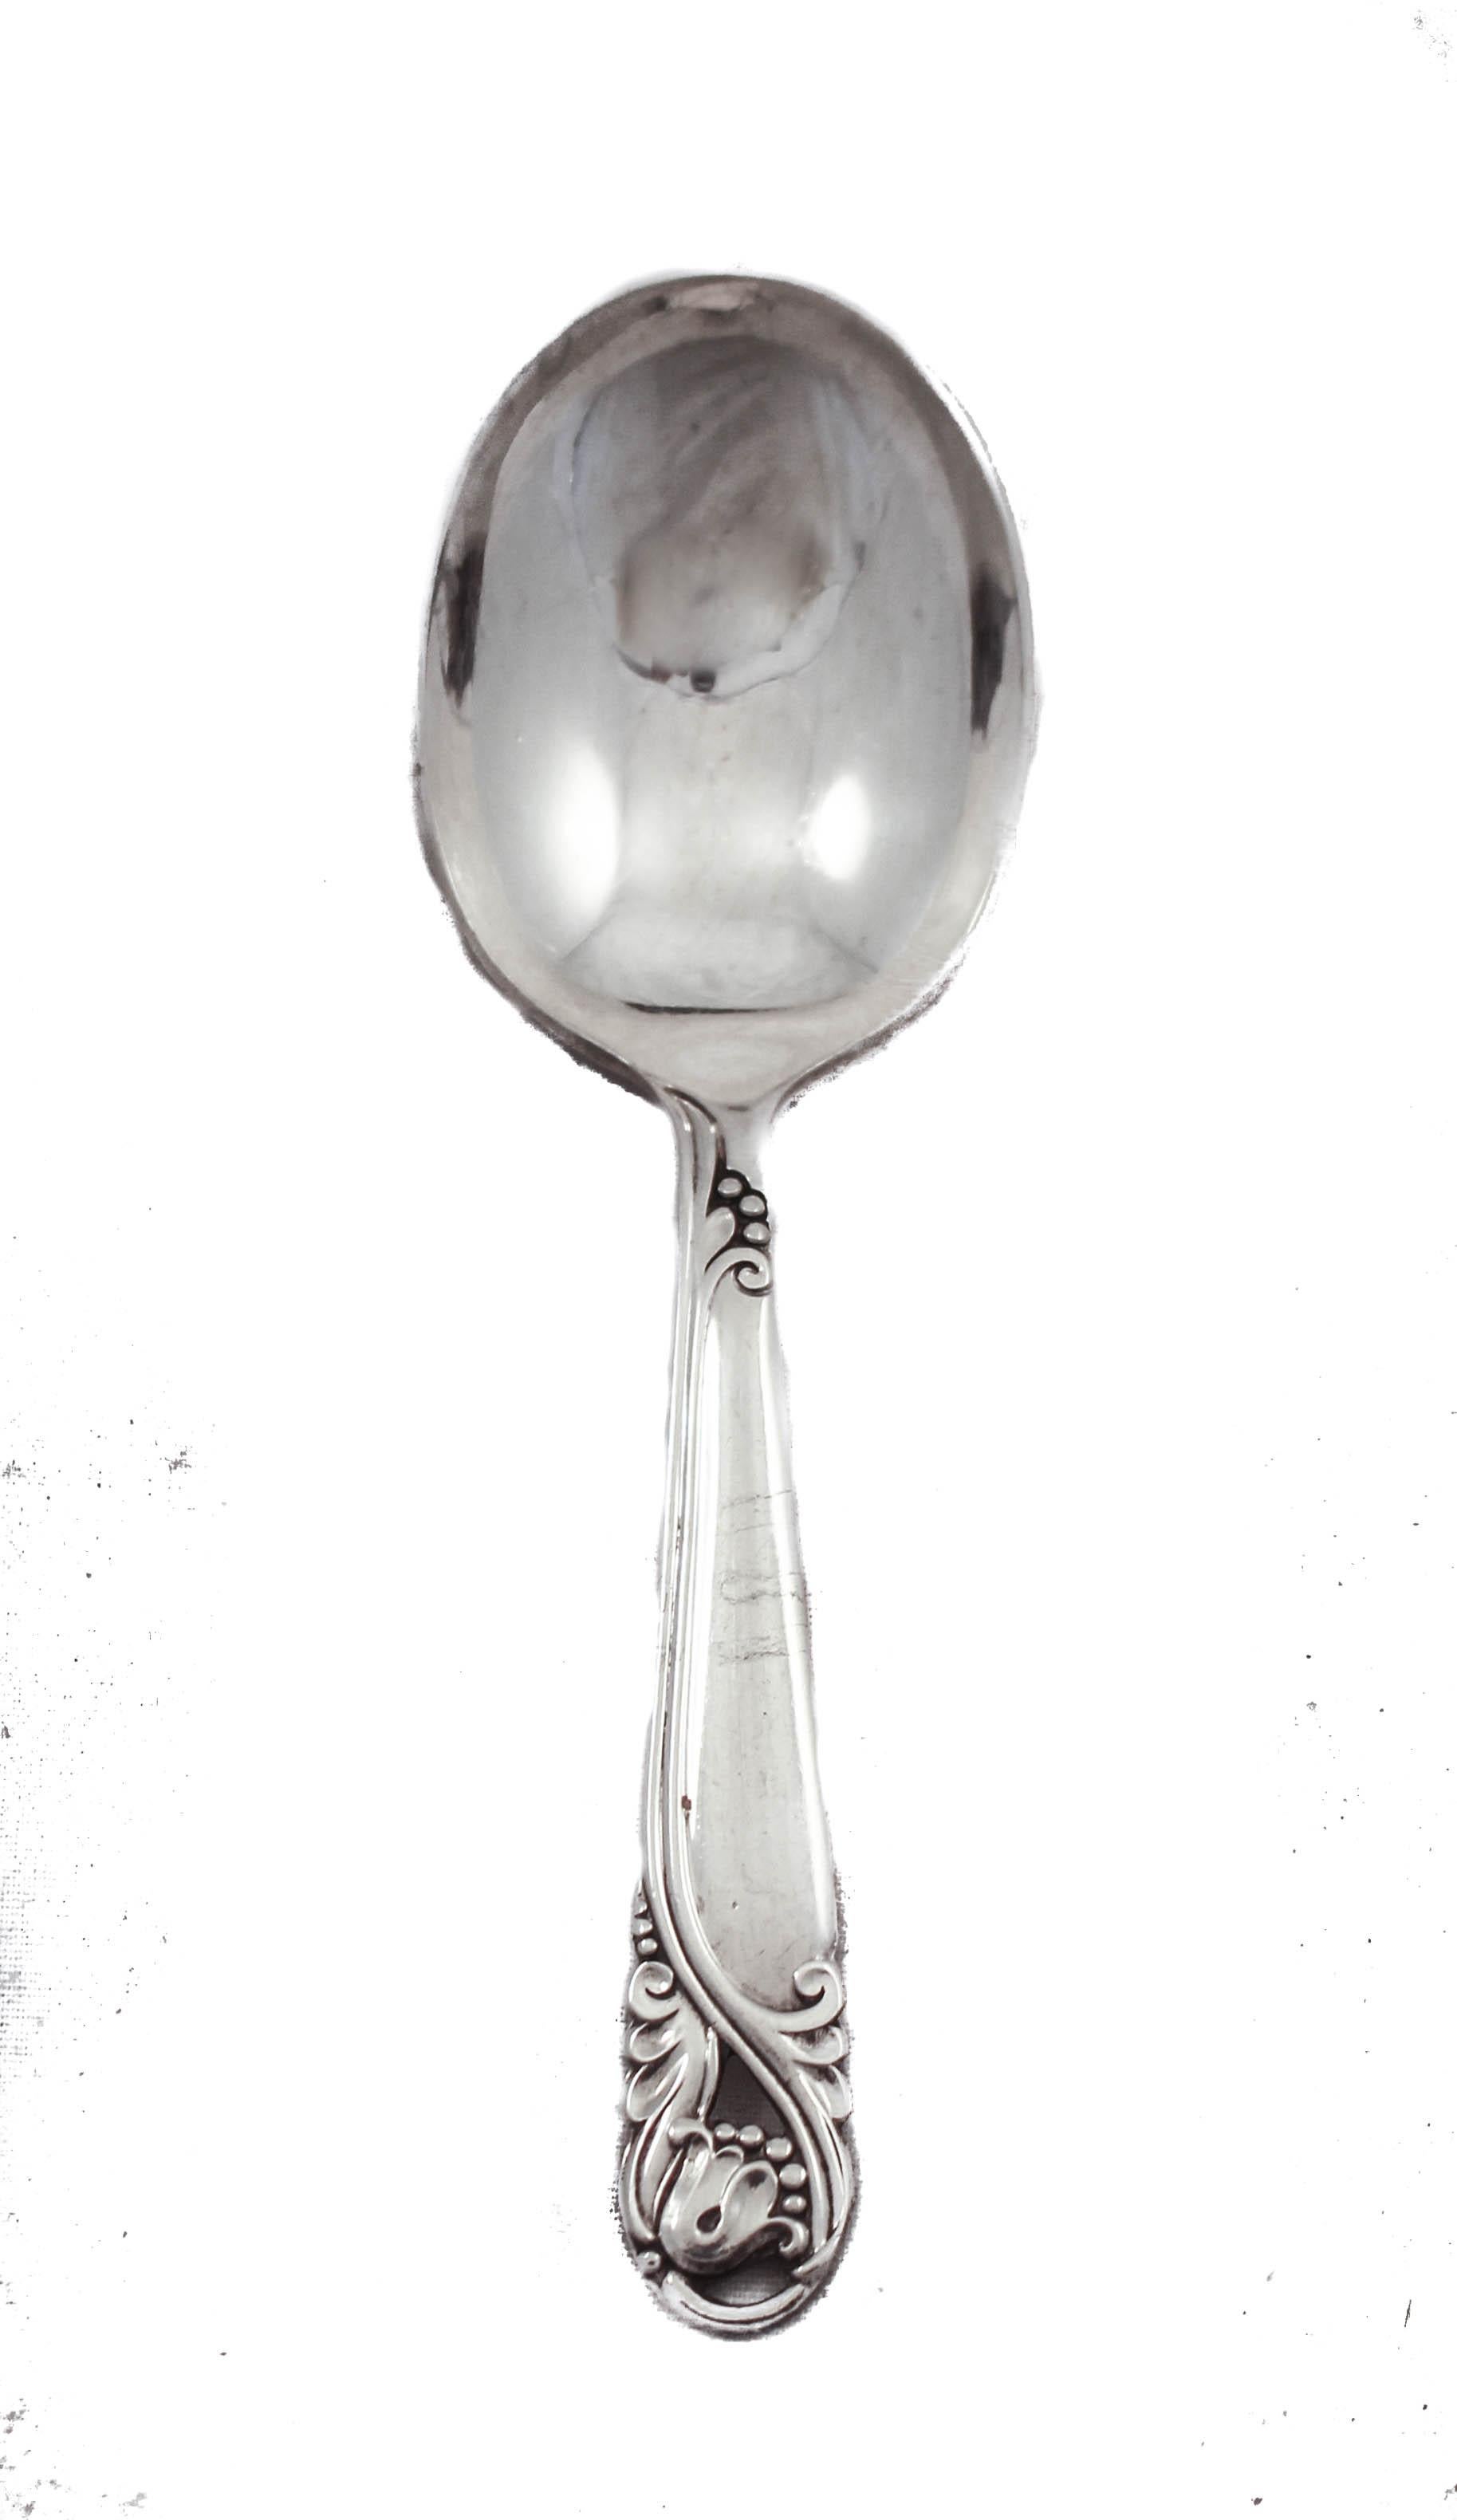 We are happy to offer this sterling silver baby fork and spoon set in the “Spring Glory” pattern by International Silver. Give the newborn prince or princess something that the can cherish forever, not something they’ll throw away. In many cultures